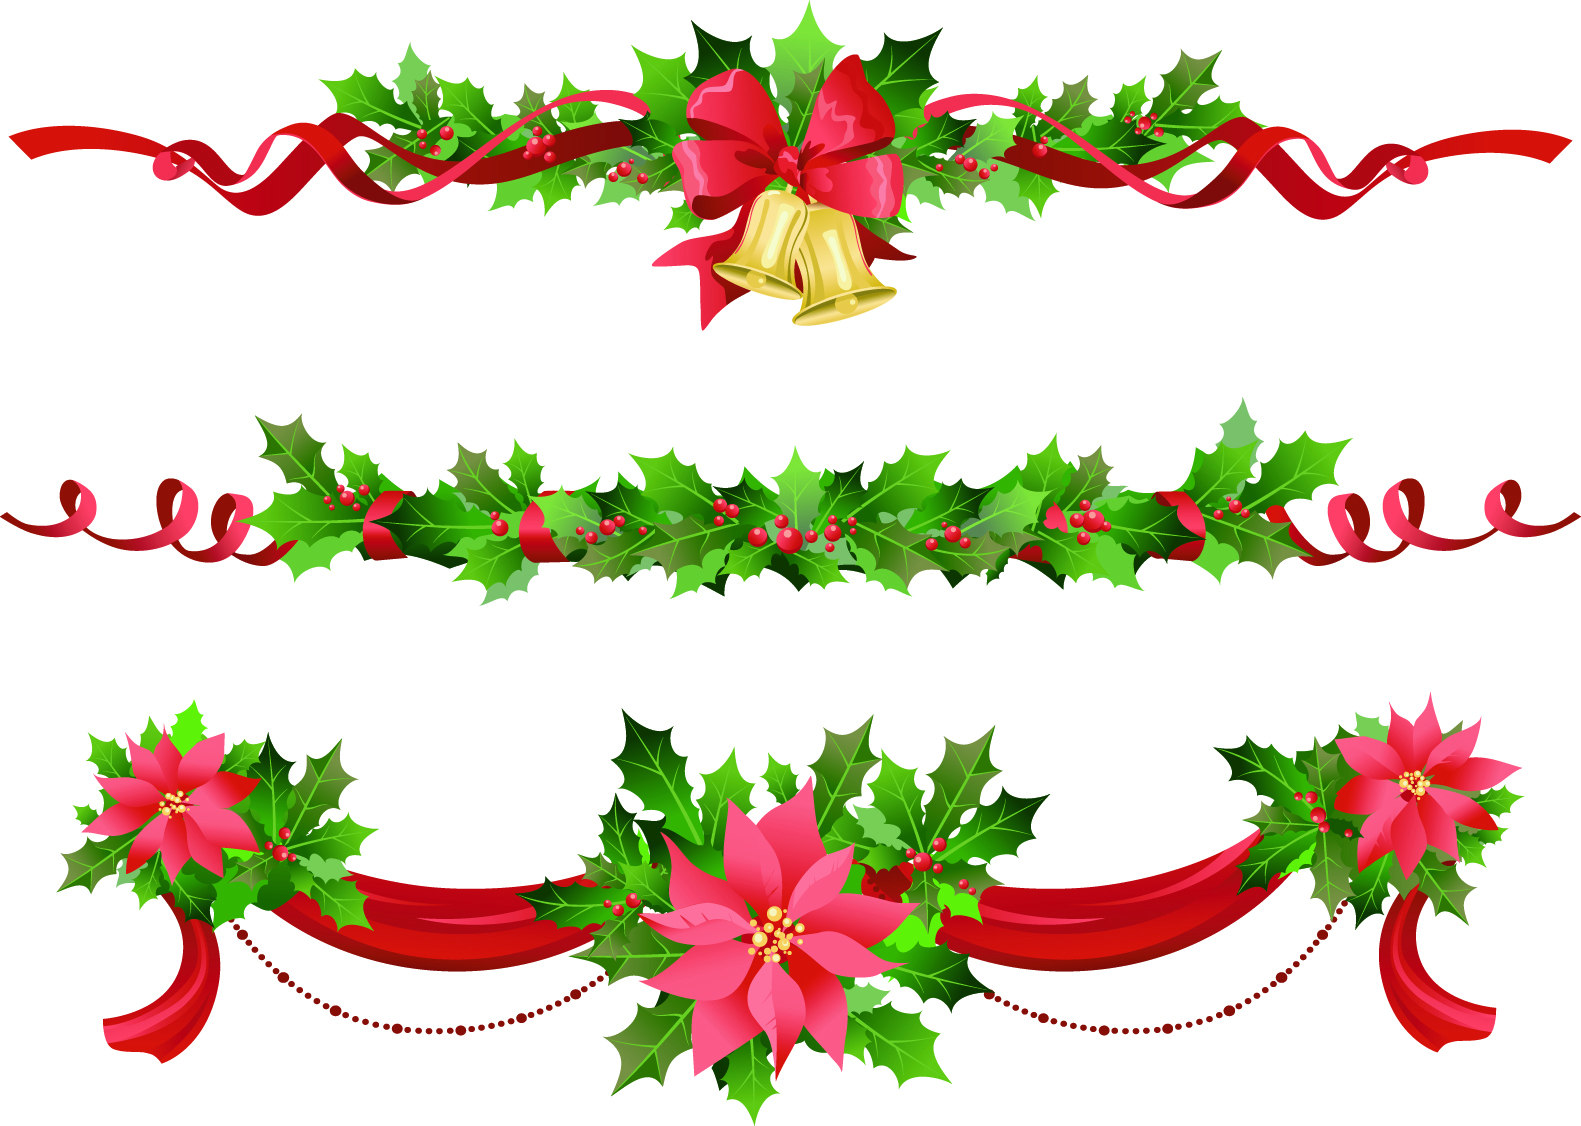 Free Christmas Vector Cliparts, Download Free Clip Art, Free.